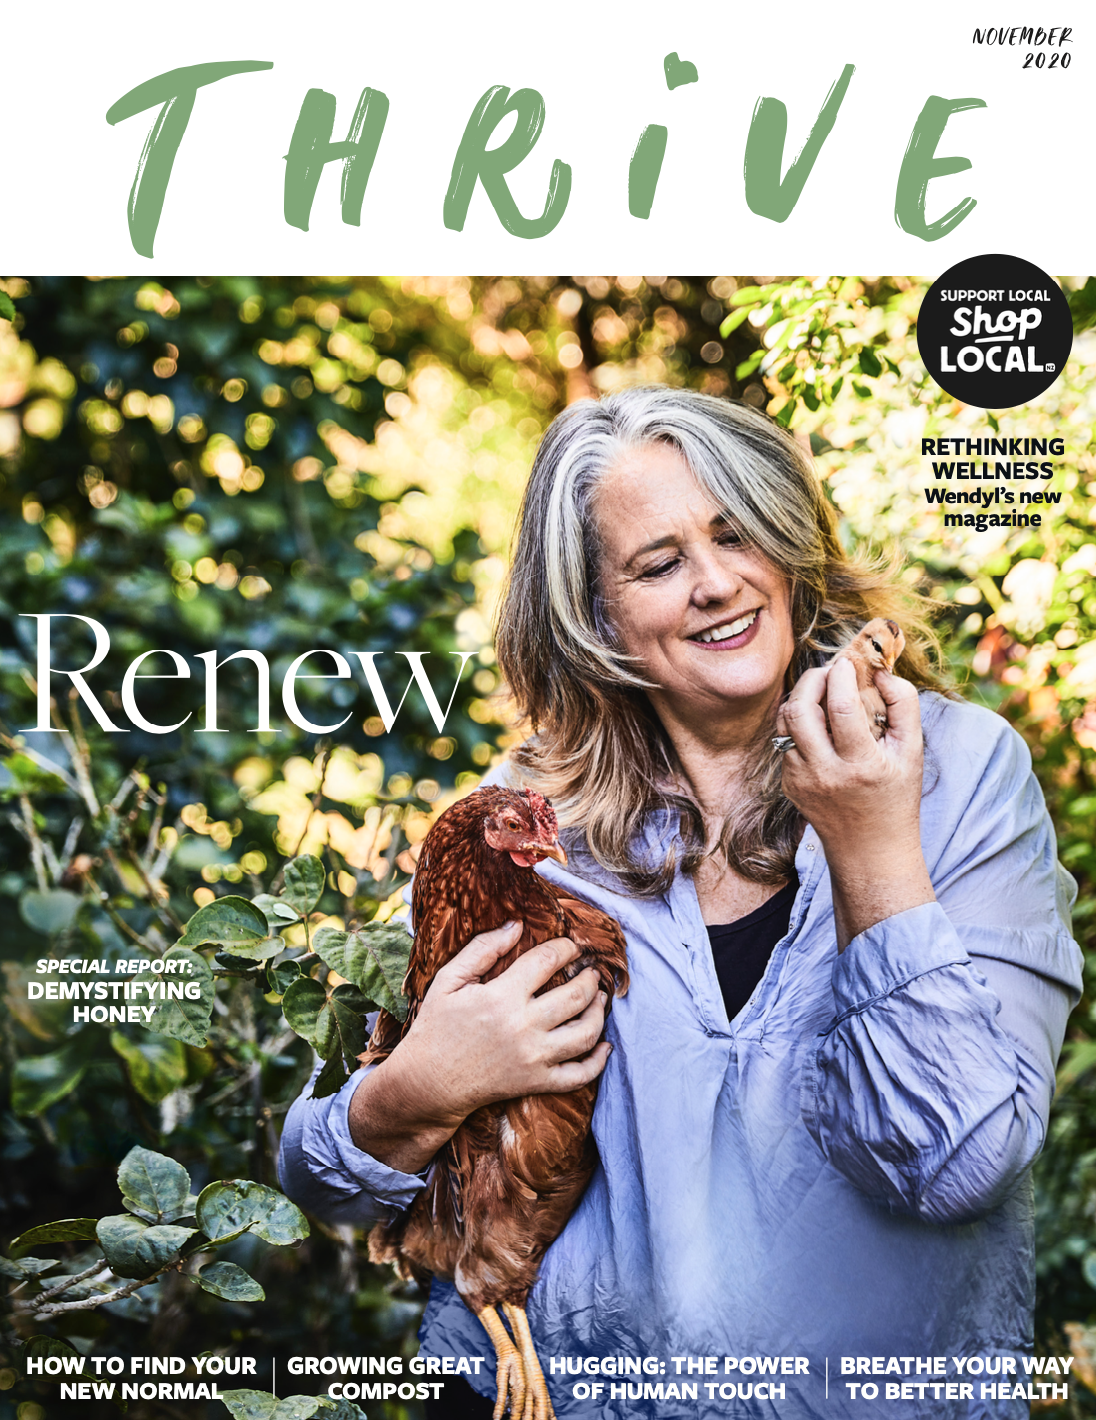 Thrive cover